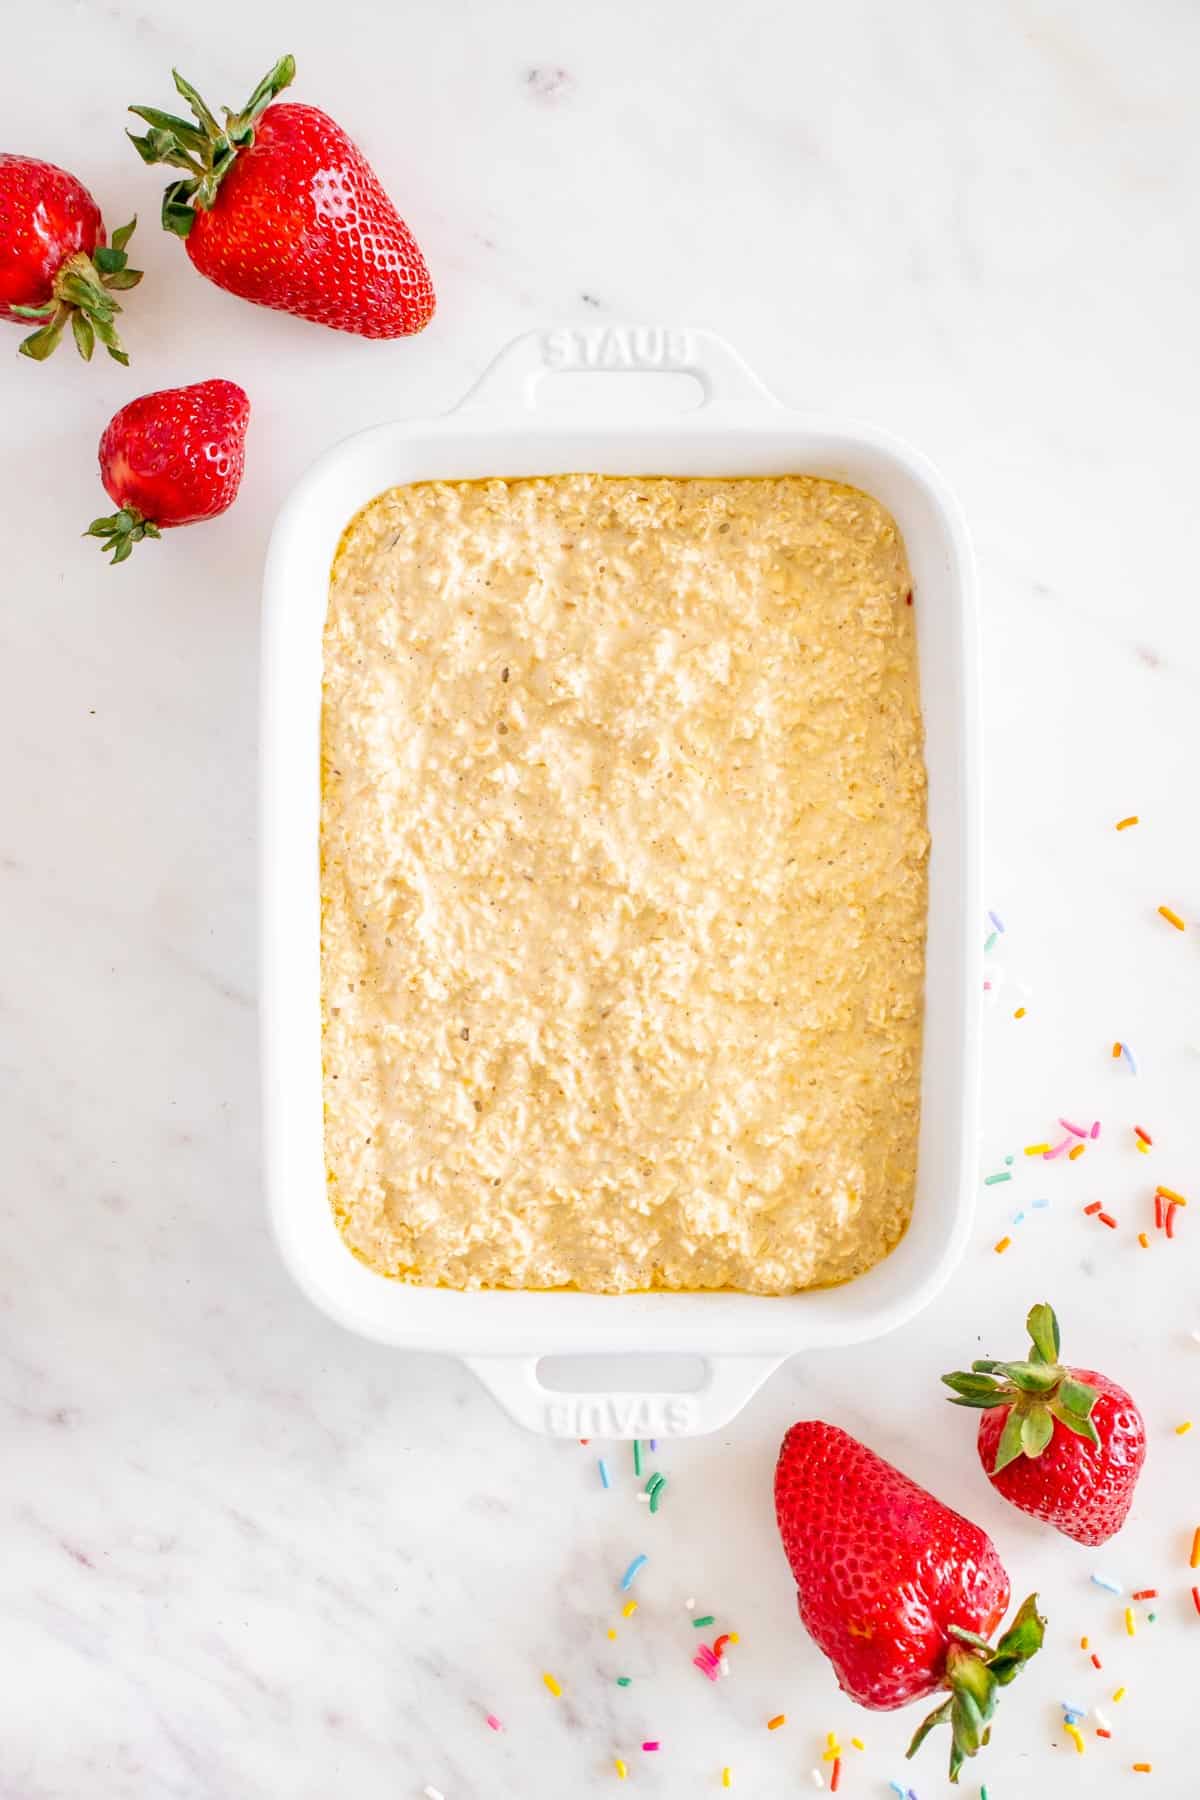 Adding a second layer of batter to make strawberry pop tart baked oats.